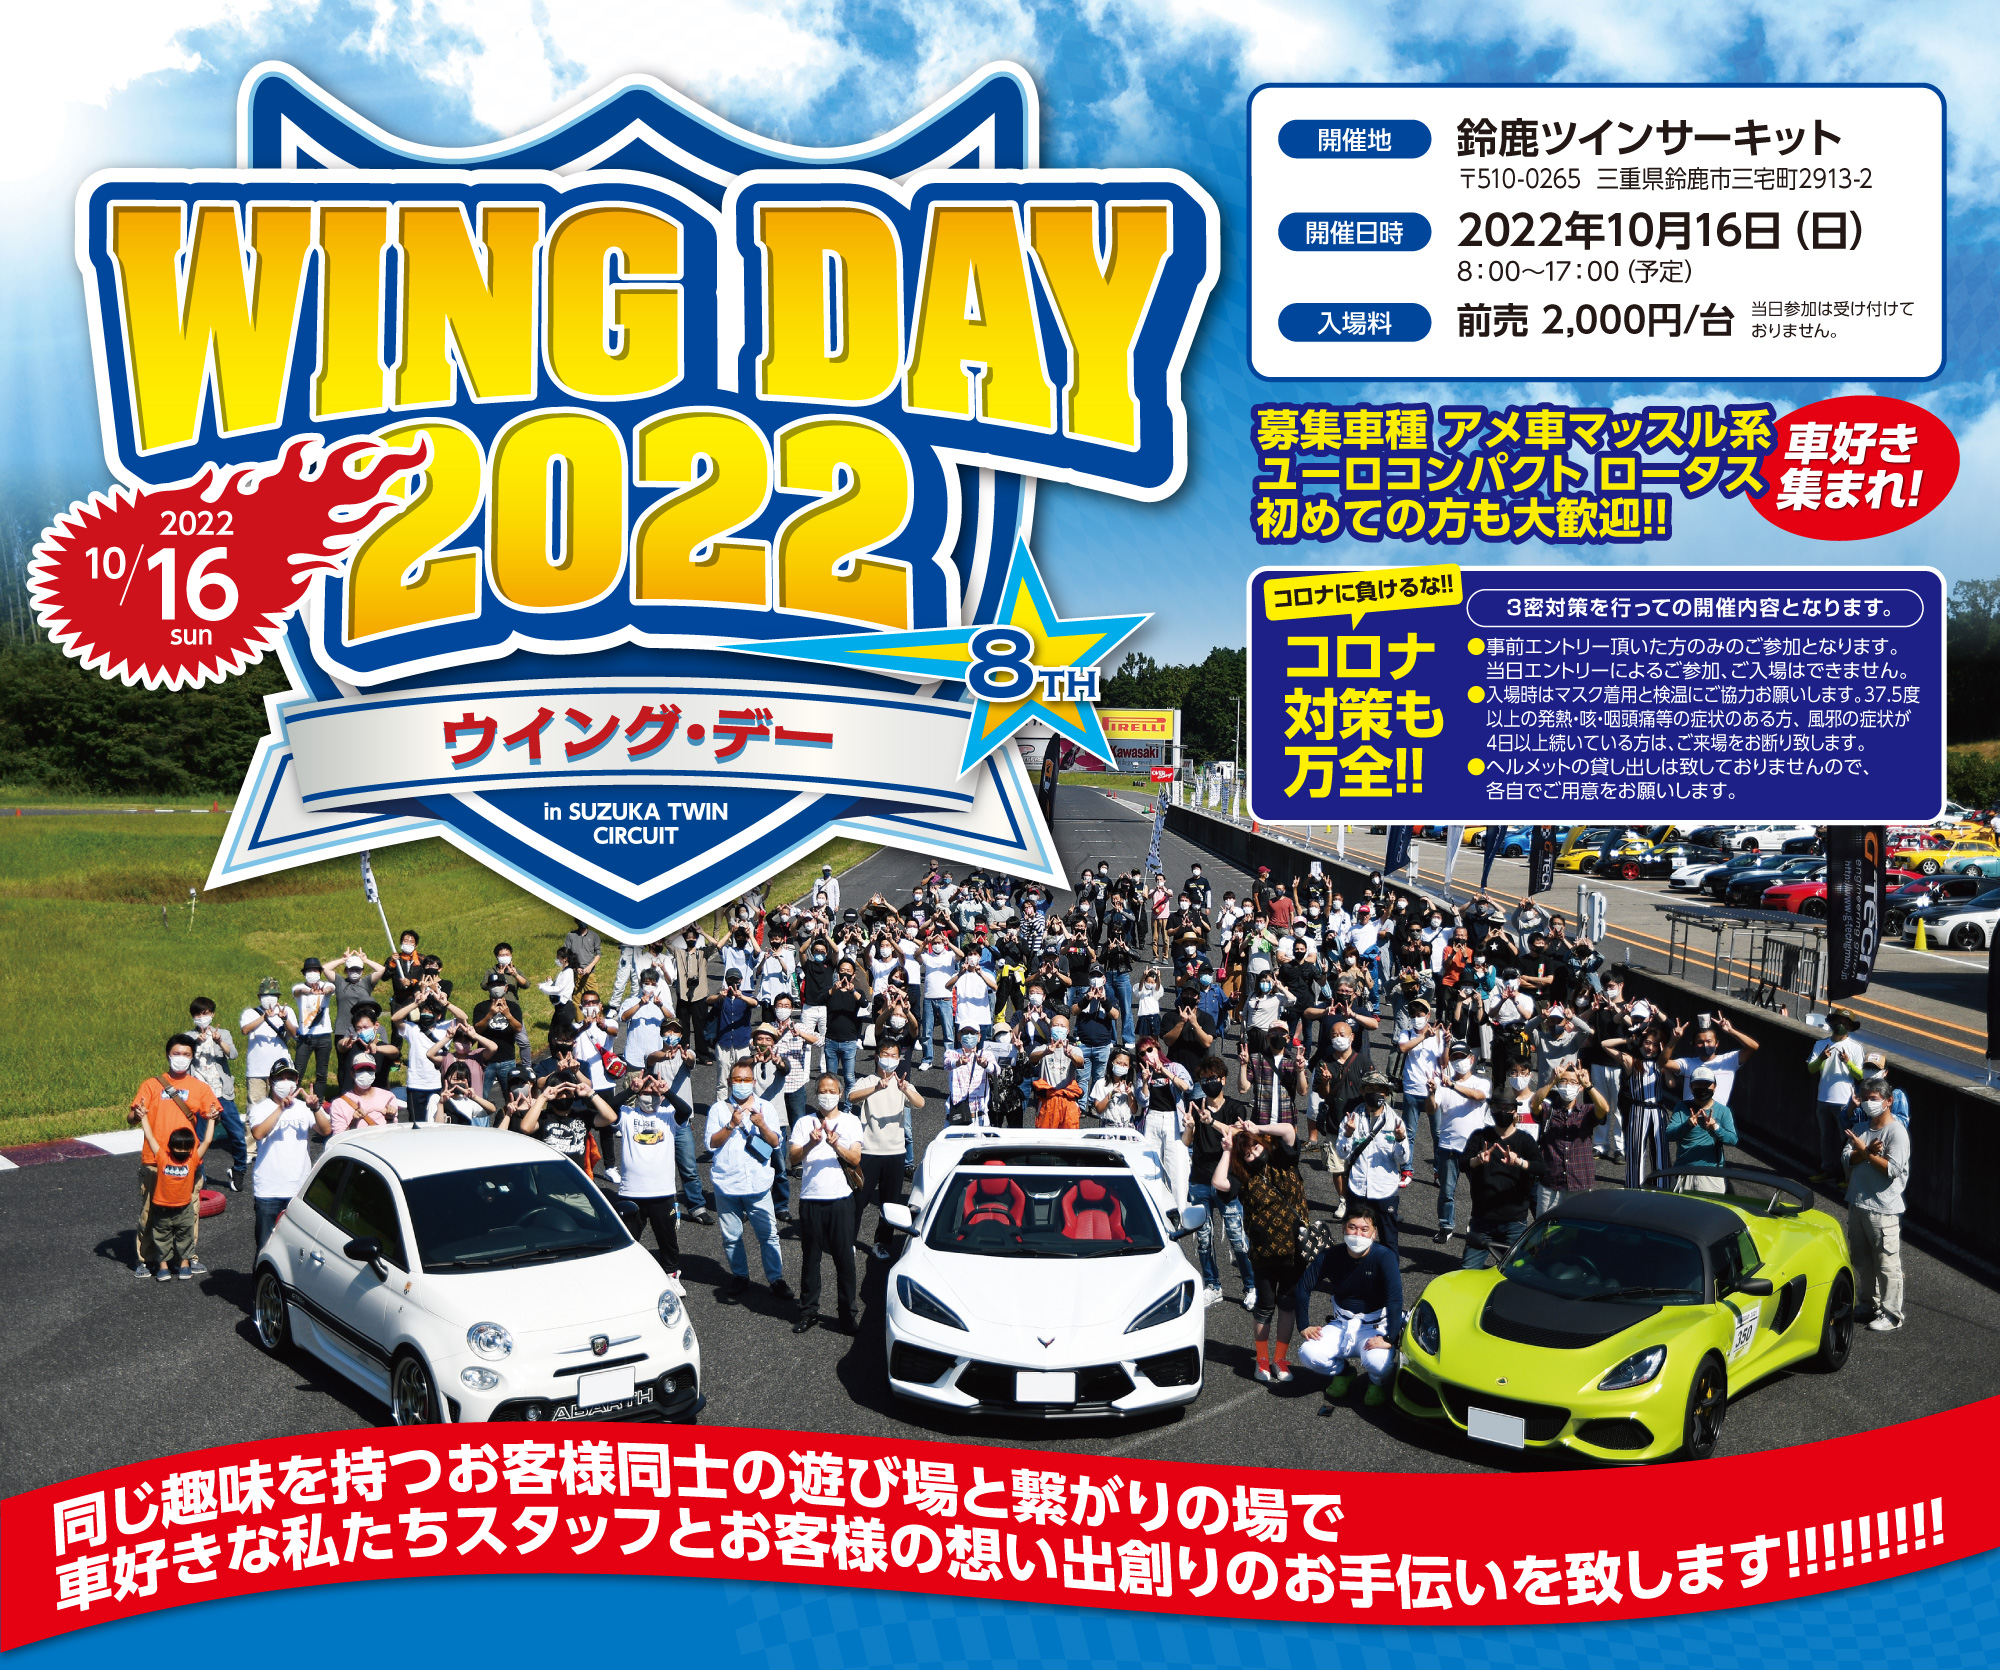 WING DAY 2022